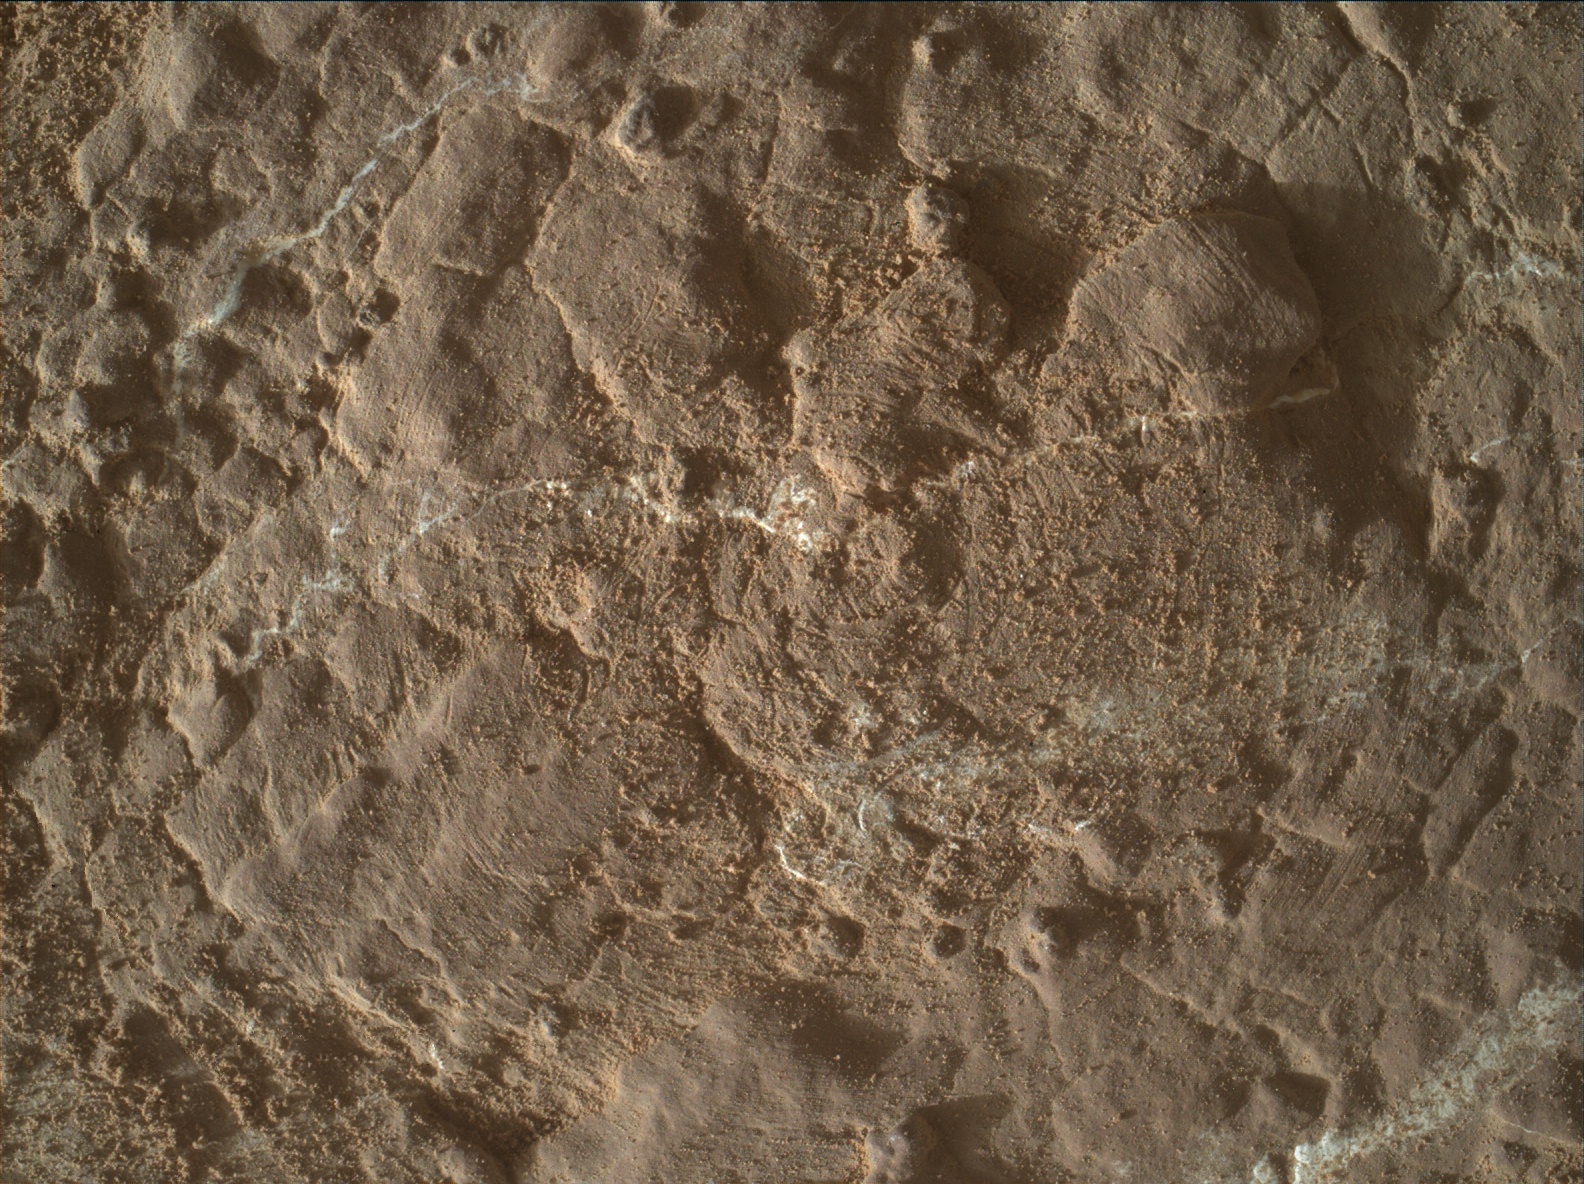 Nasa's Mars rover Curiosity acquired this image using its Mars Hand Lens Imager (MAHLI) on Sol 2609